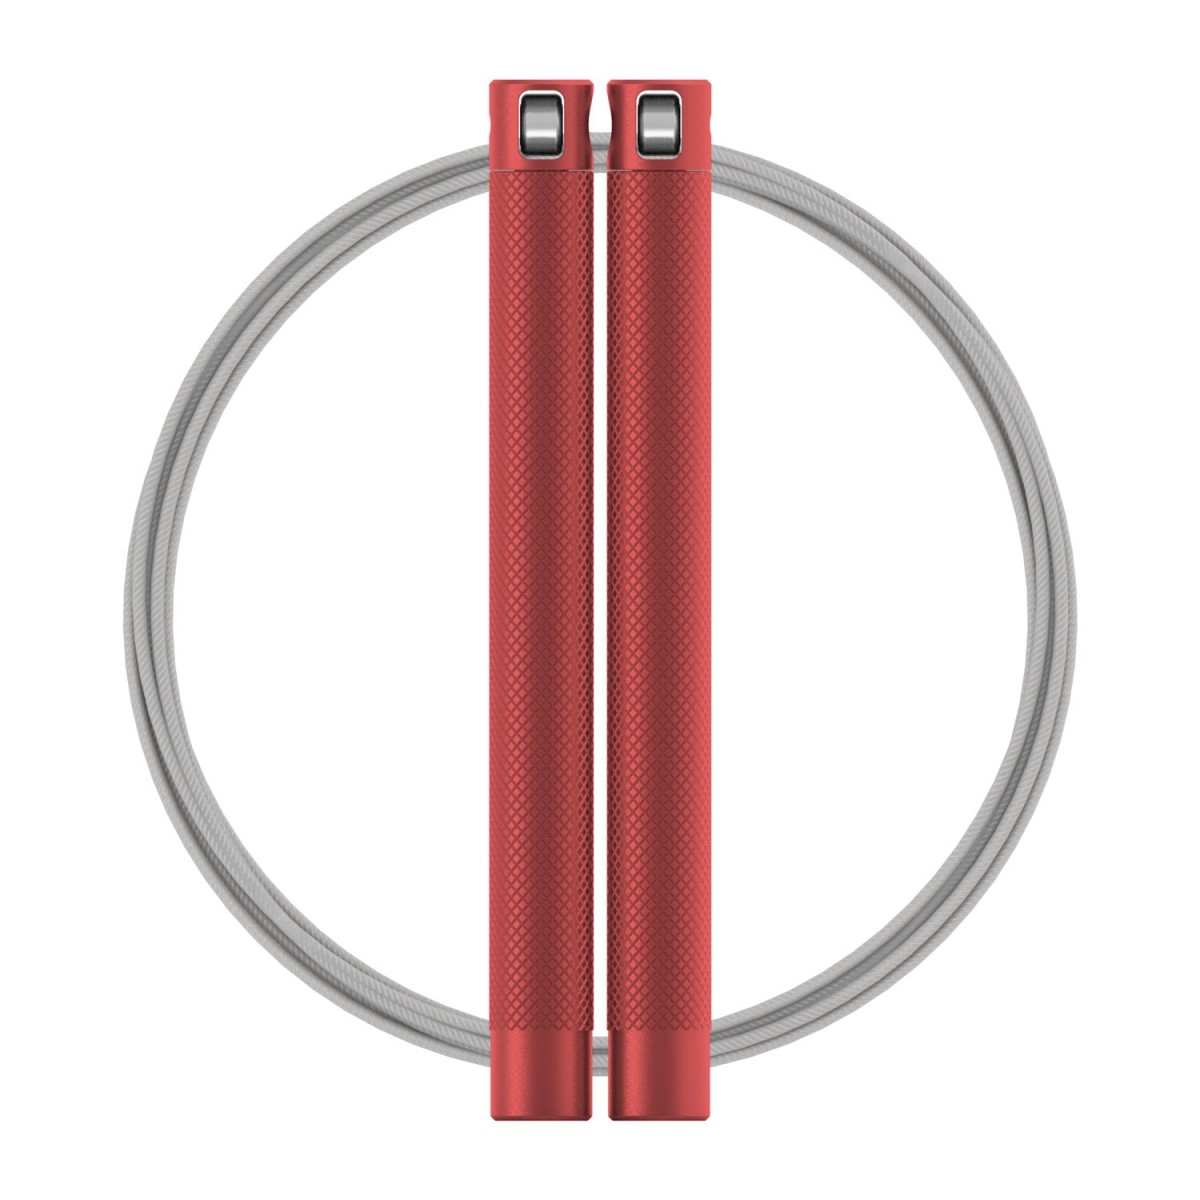 rpm-jump-rope-session-4-red